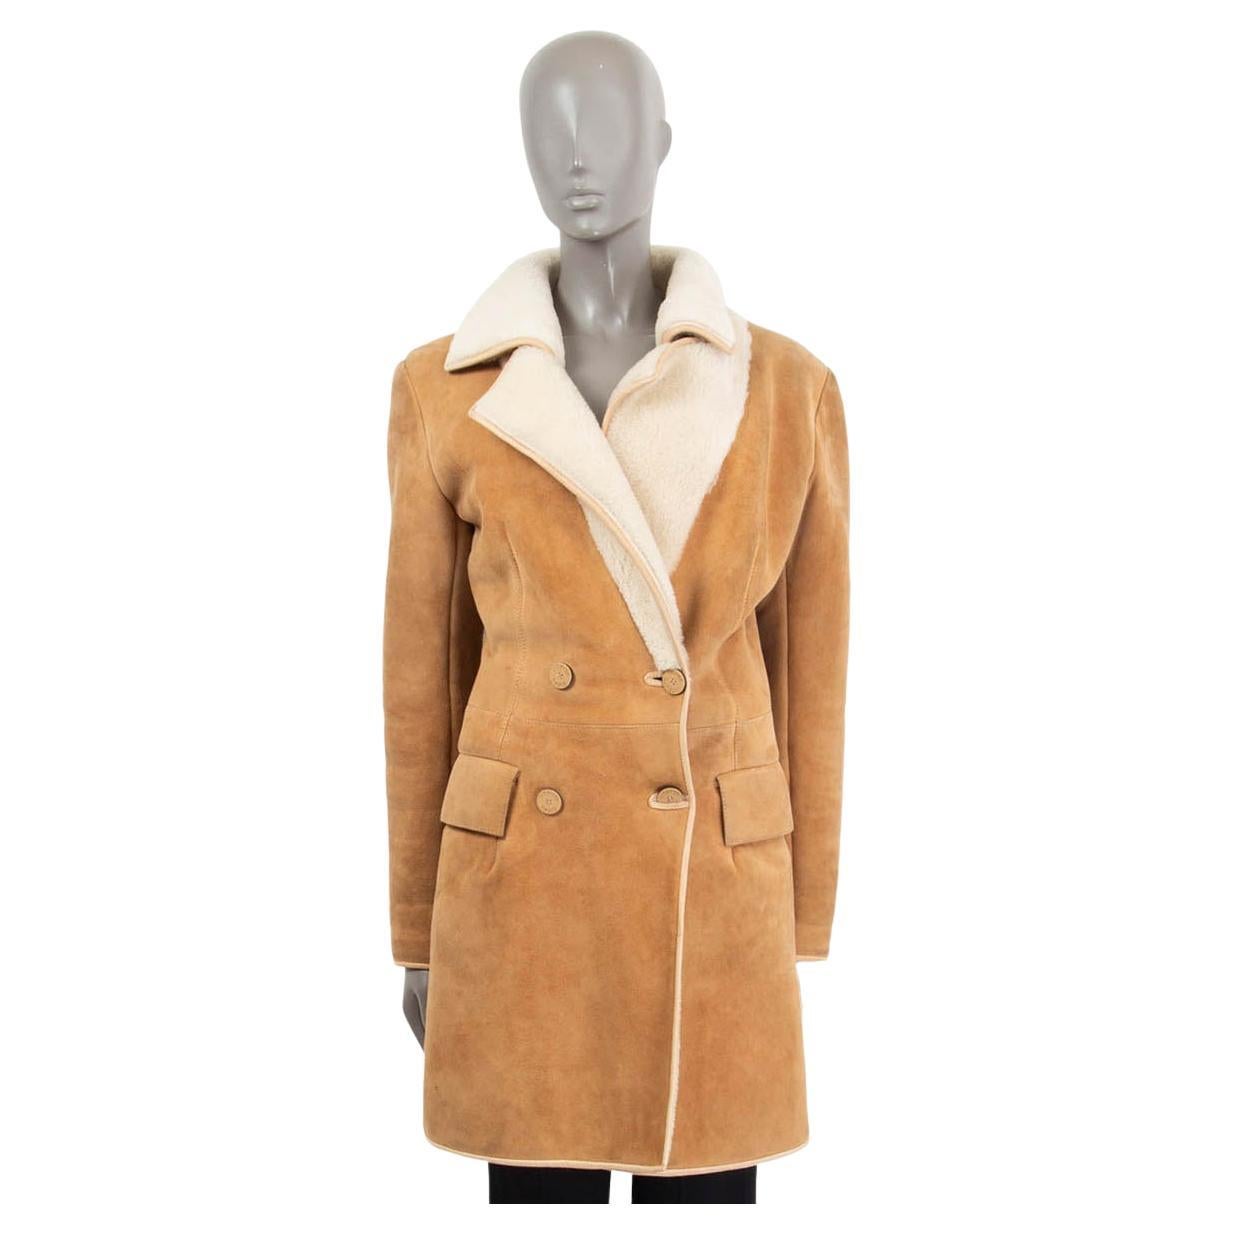 JITROIS beige suede & ivory SHEARLING DOUBLE BREASTED Coat Jacket XS